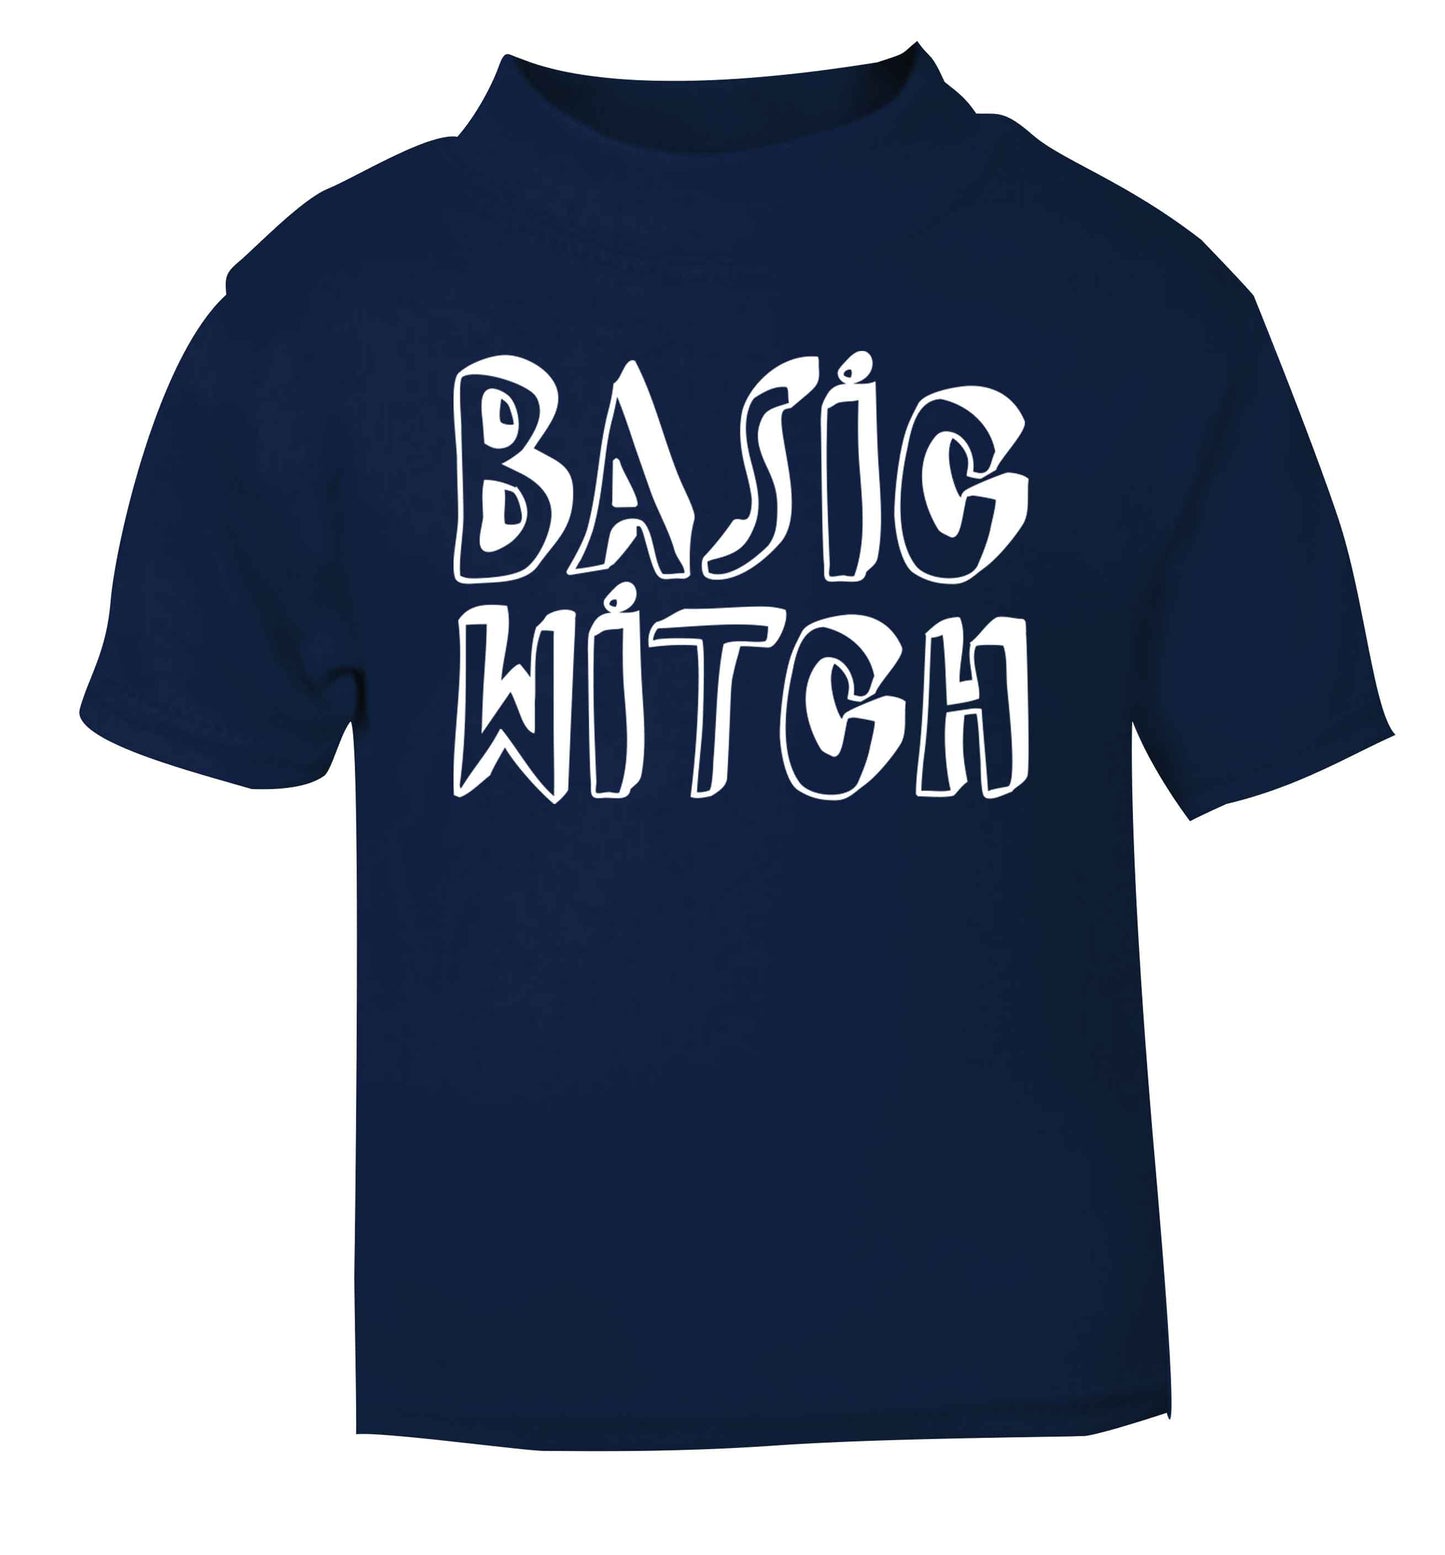 Basic witch navy baby toddler Tshirt 2 Years